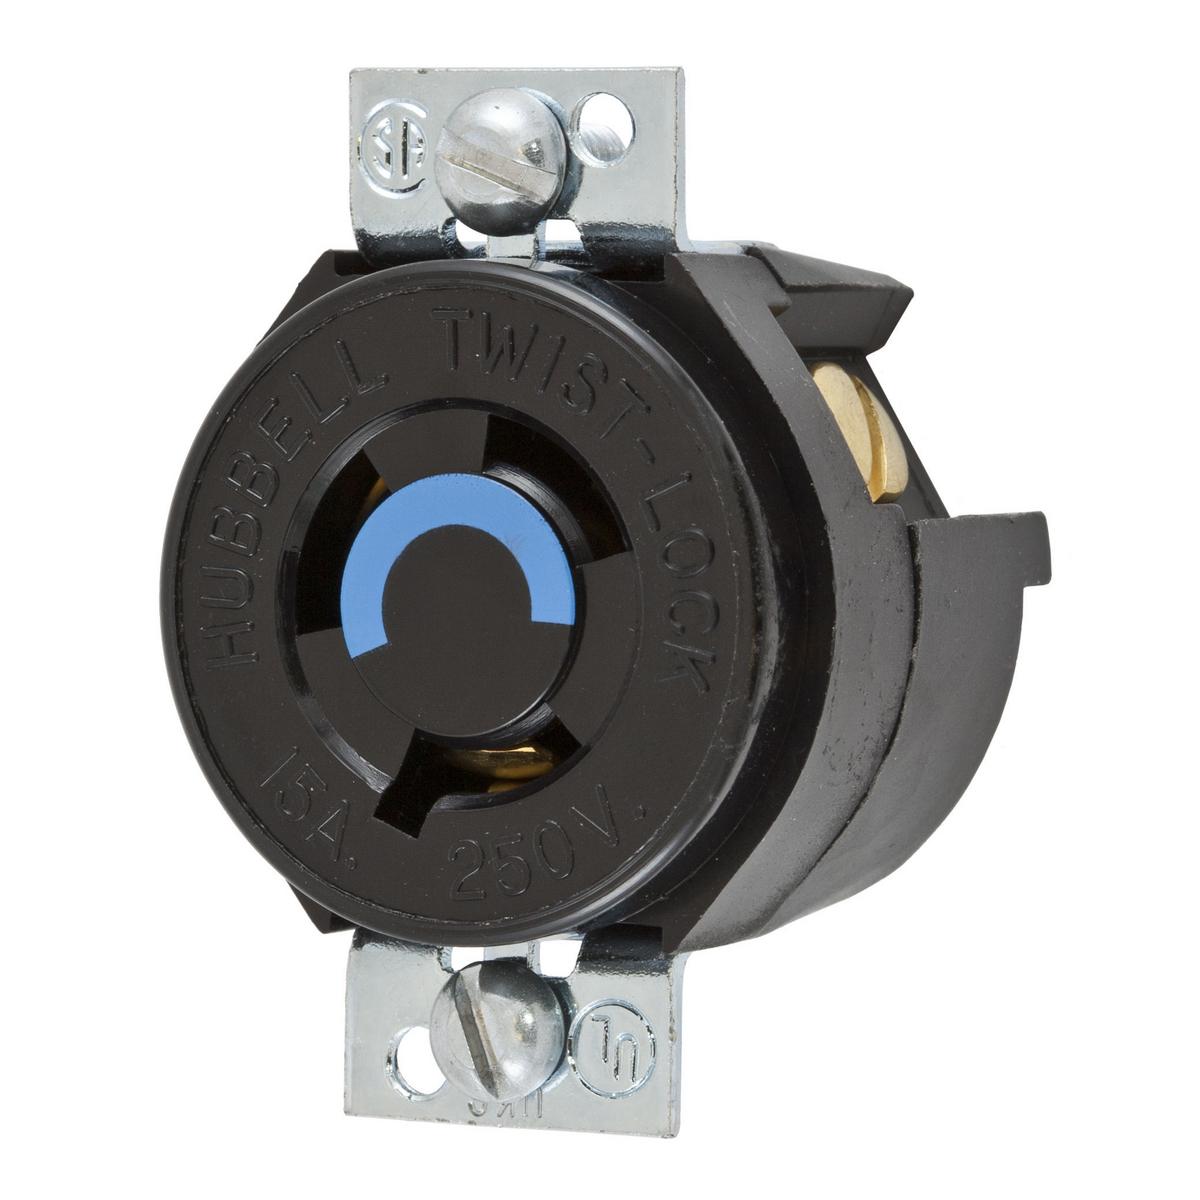 Hubbell HBL4563 Locking Devices, Twist-Lock®, Industrial, Panel Mount Receptacle, 15A 250V, 2-Pole 3-Wire Grounding, NEMA L6-15R, Screw Terminal, Side wired, Black Nylon.  ; Reinforced thermoplastic construction ; Single piece, all brass contacts ; All terminals are back